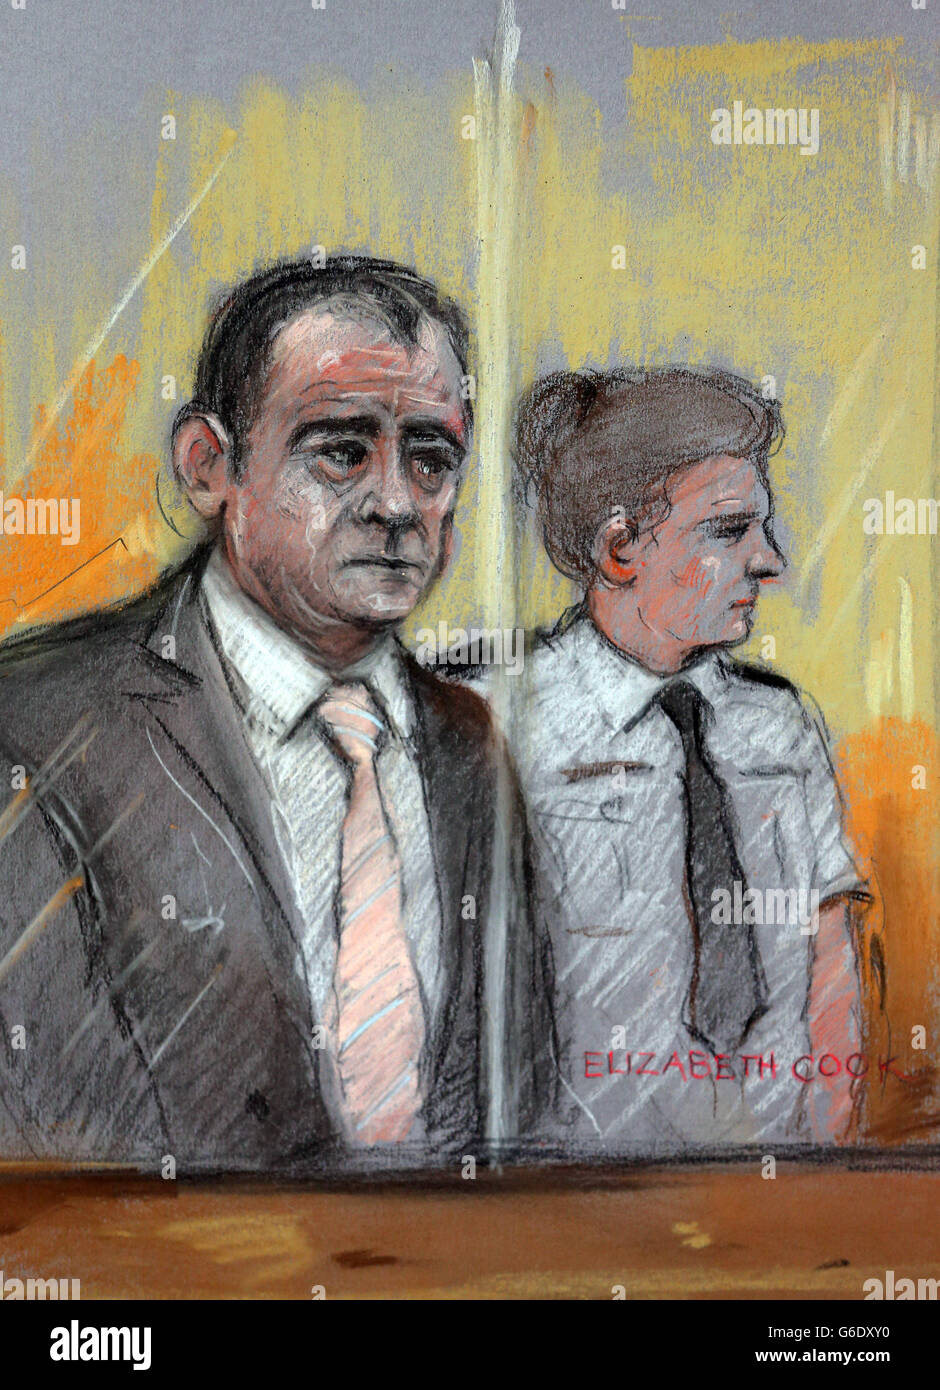 Court artist sketch by Elizabeth Cook of Coronation Street actor Michael Le Vell in the dock at Manchester Crown Court where he is accused of raping a young girl. Stock Photo